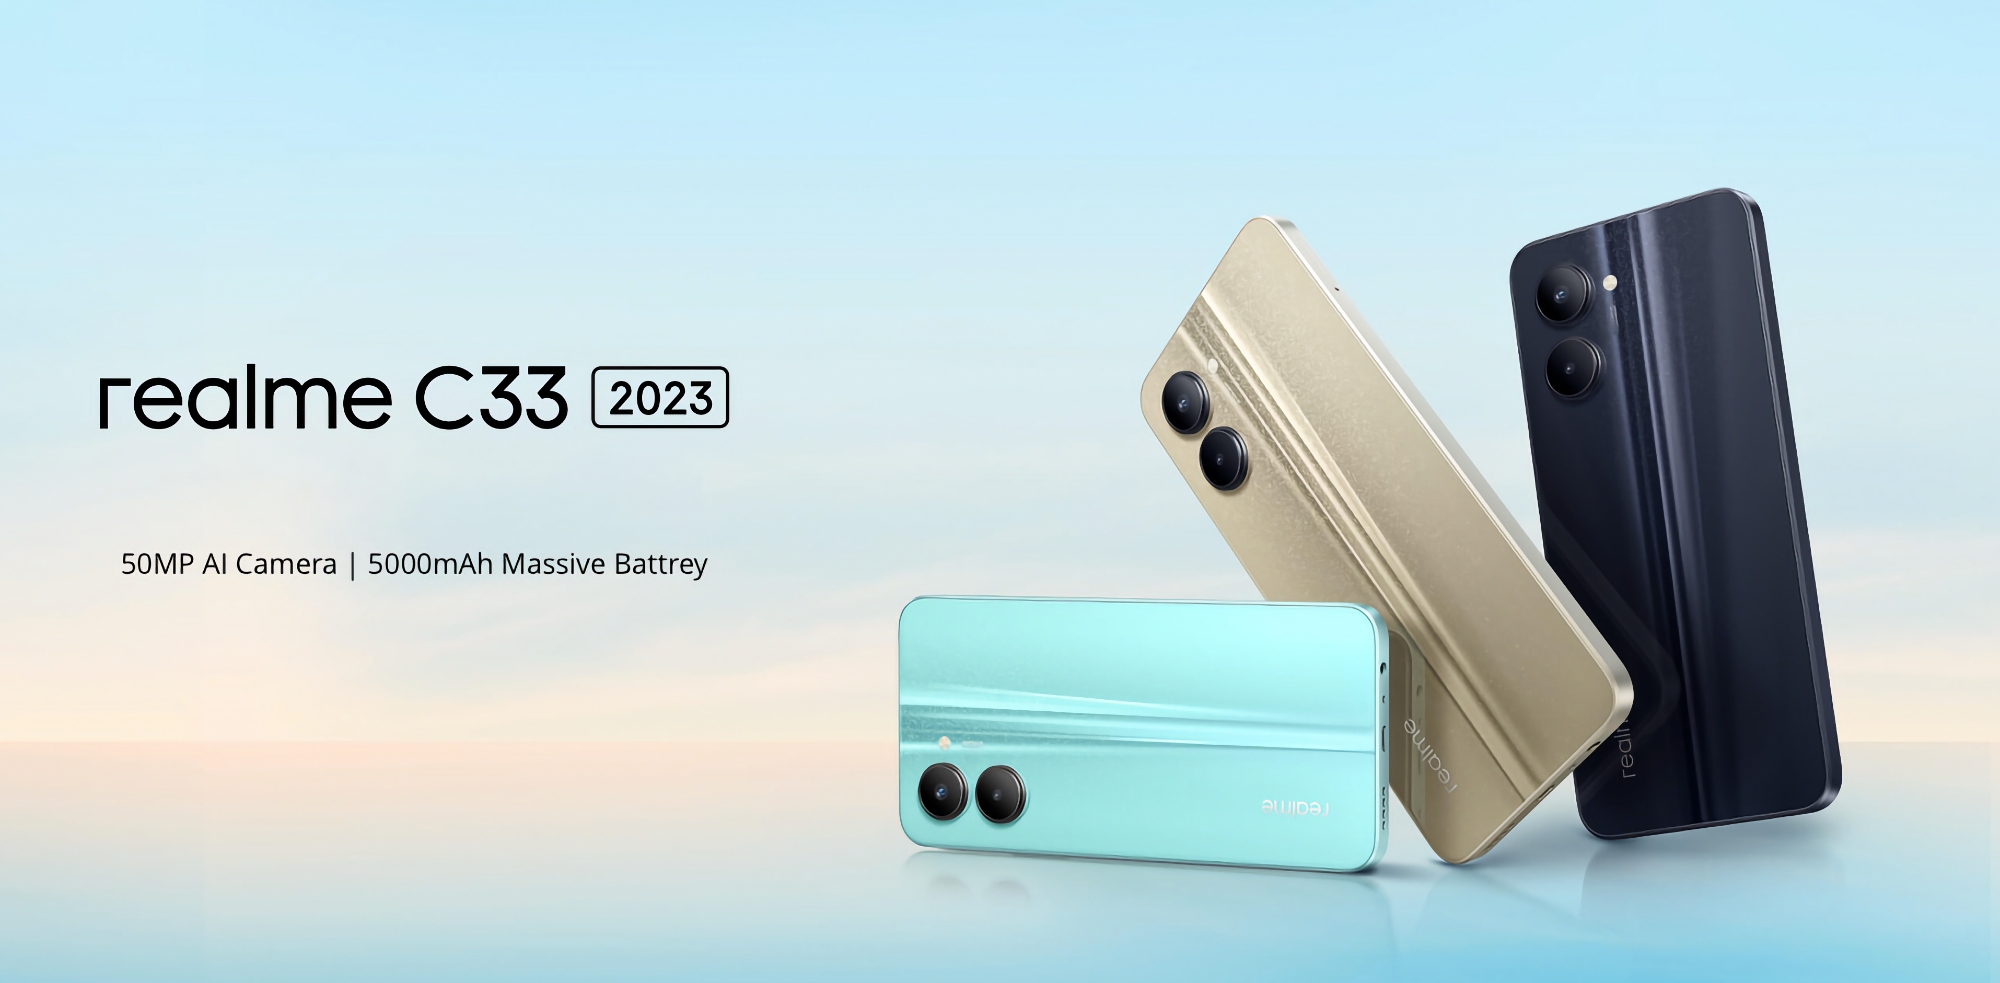 Unexpectedly! realme has unveiled a new version of the budget smartphone realme C33 with an IPS display and 50 MP camera